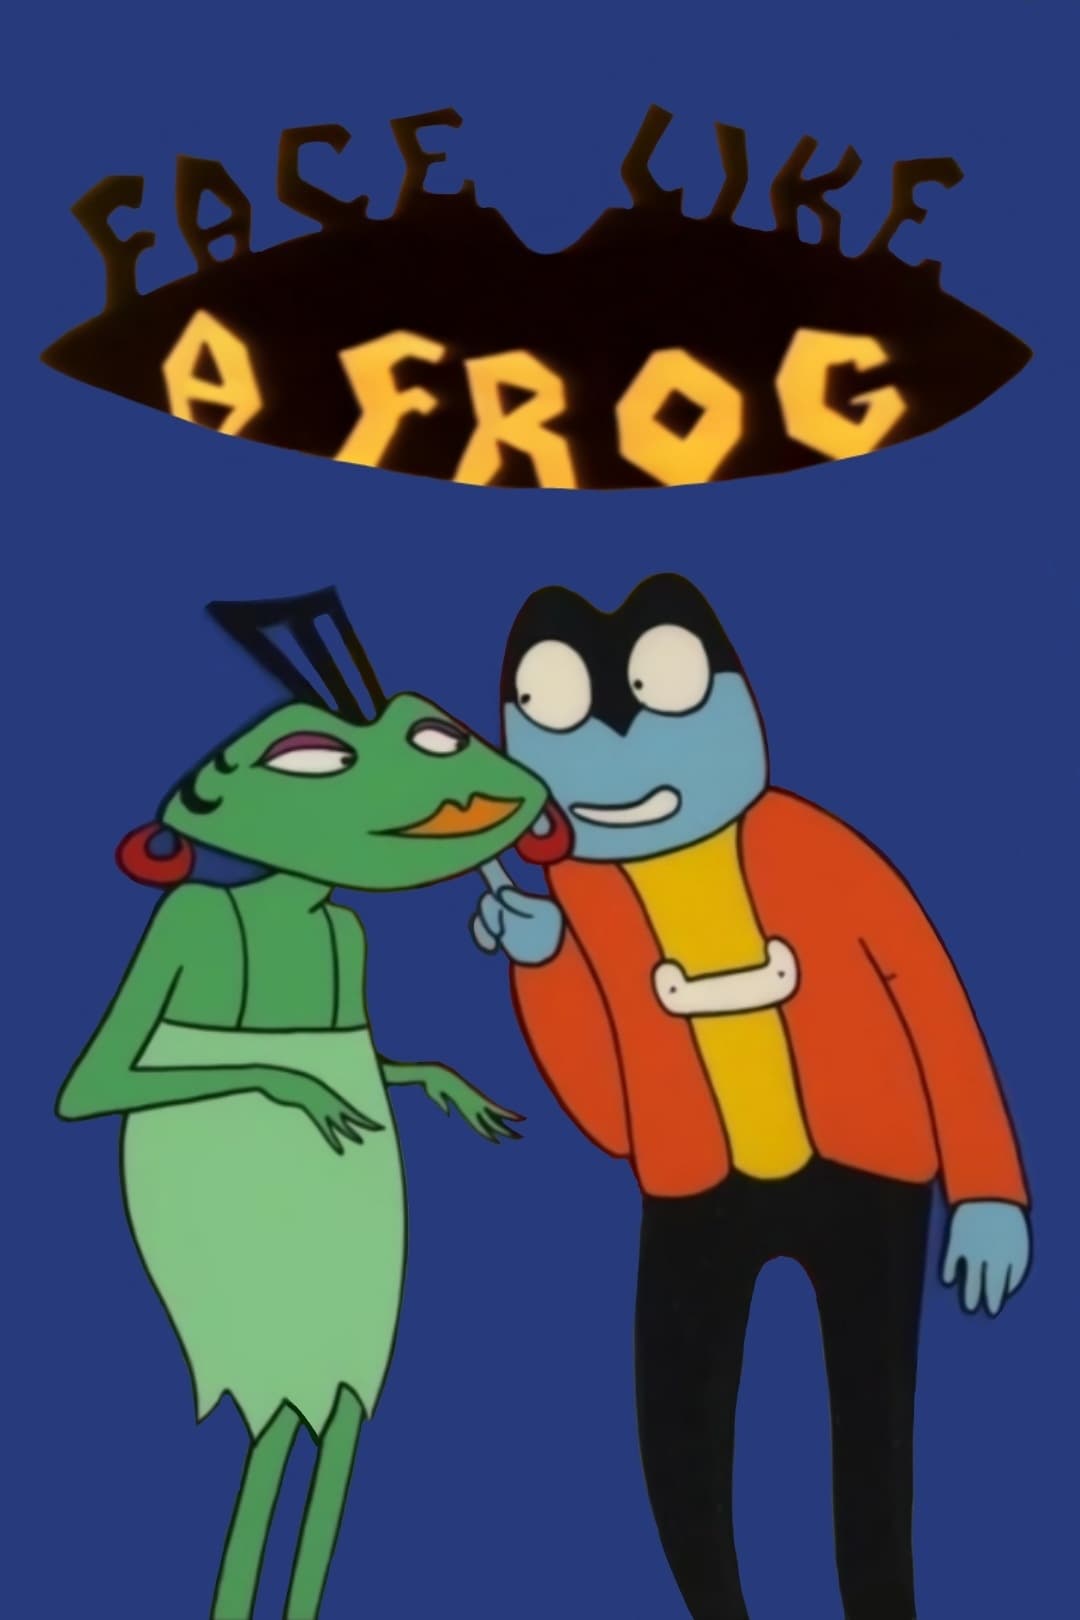 Face Like a Frog (1988)